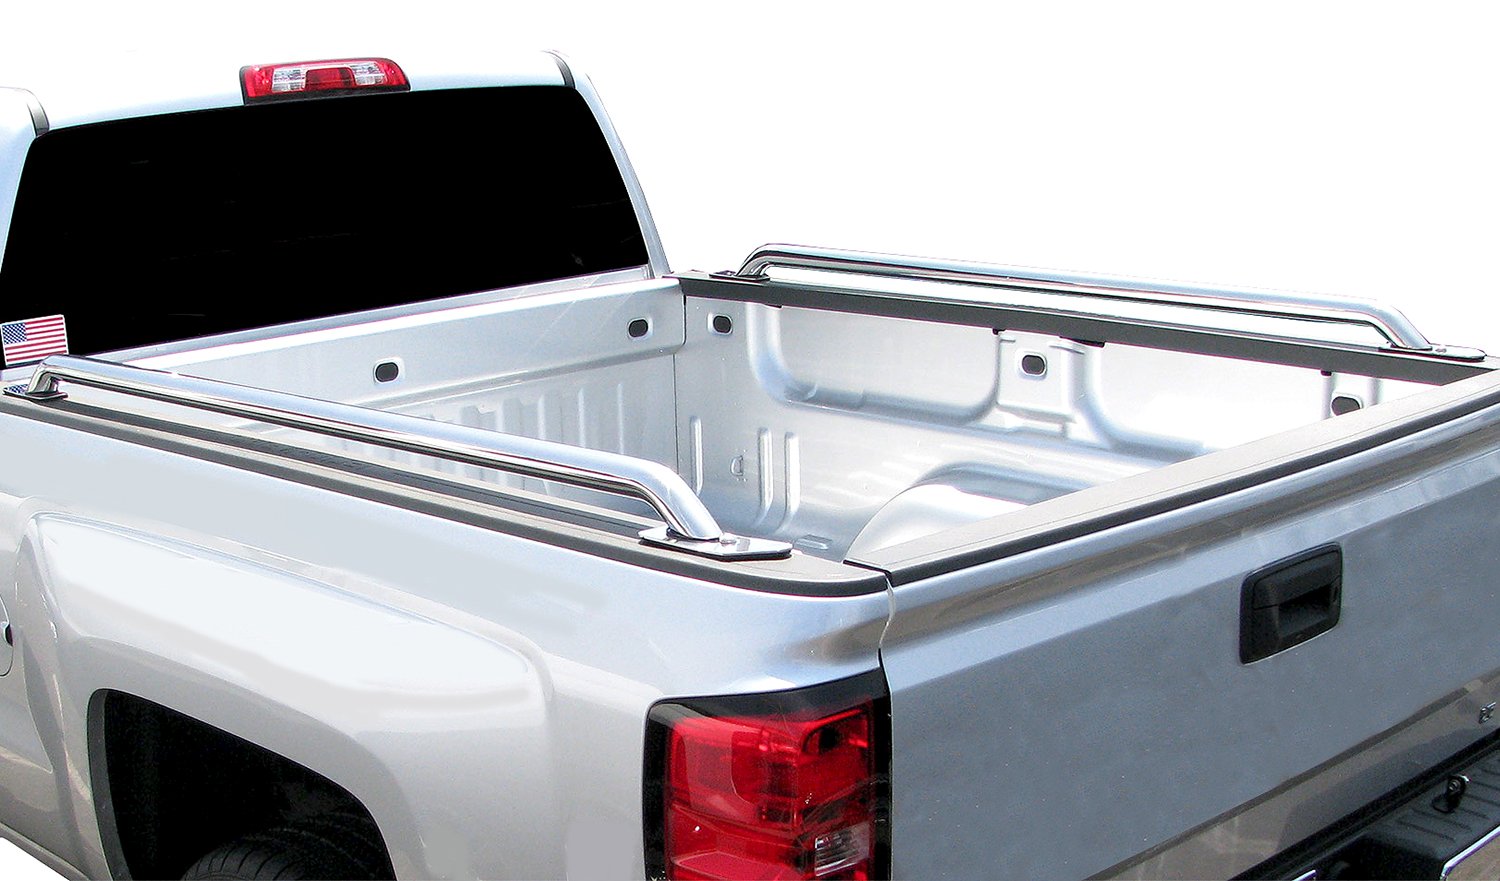 Exclud. Super Crew w/5.5 Short Bed Steelcraft 612417 Compatible with 97-14 Ford F150 6.5 Short Bed/Bed Rails S/S Stainless Steel Truck Side Bed Rails 78 inch